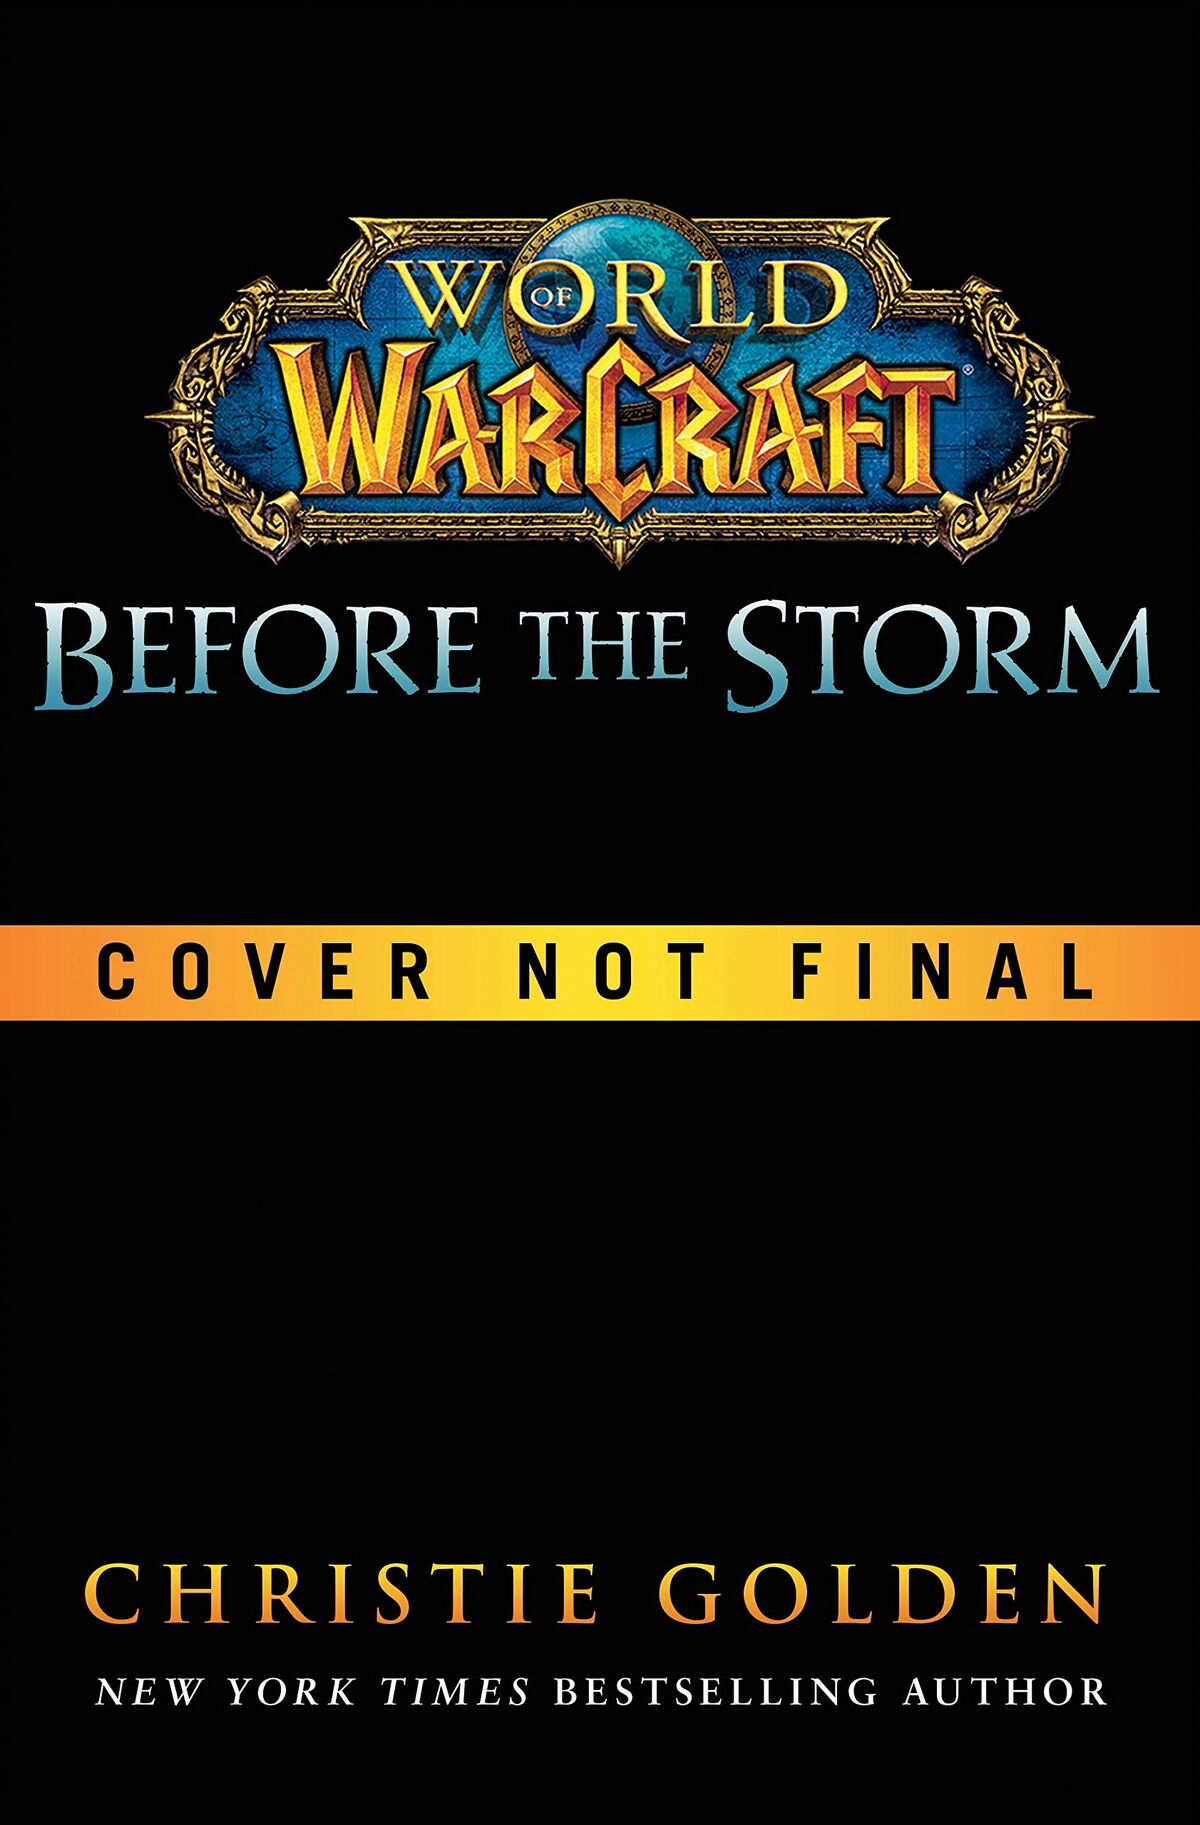 Against the Storm feels like WarCraft without the war, and it's